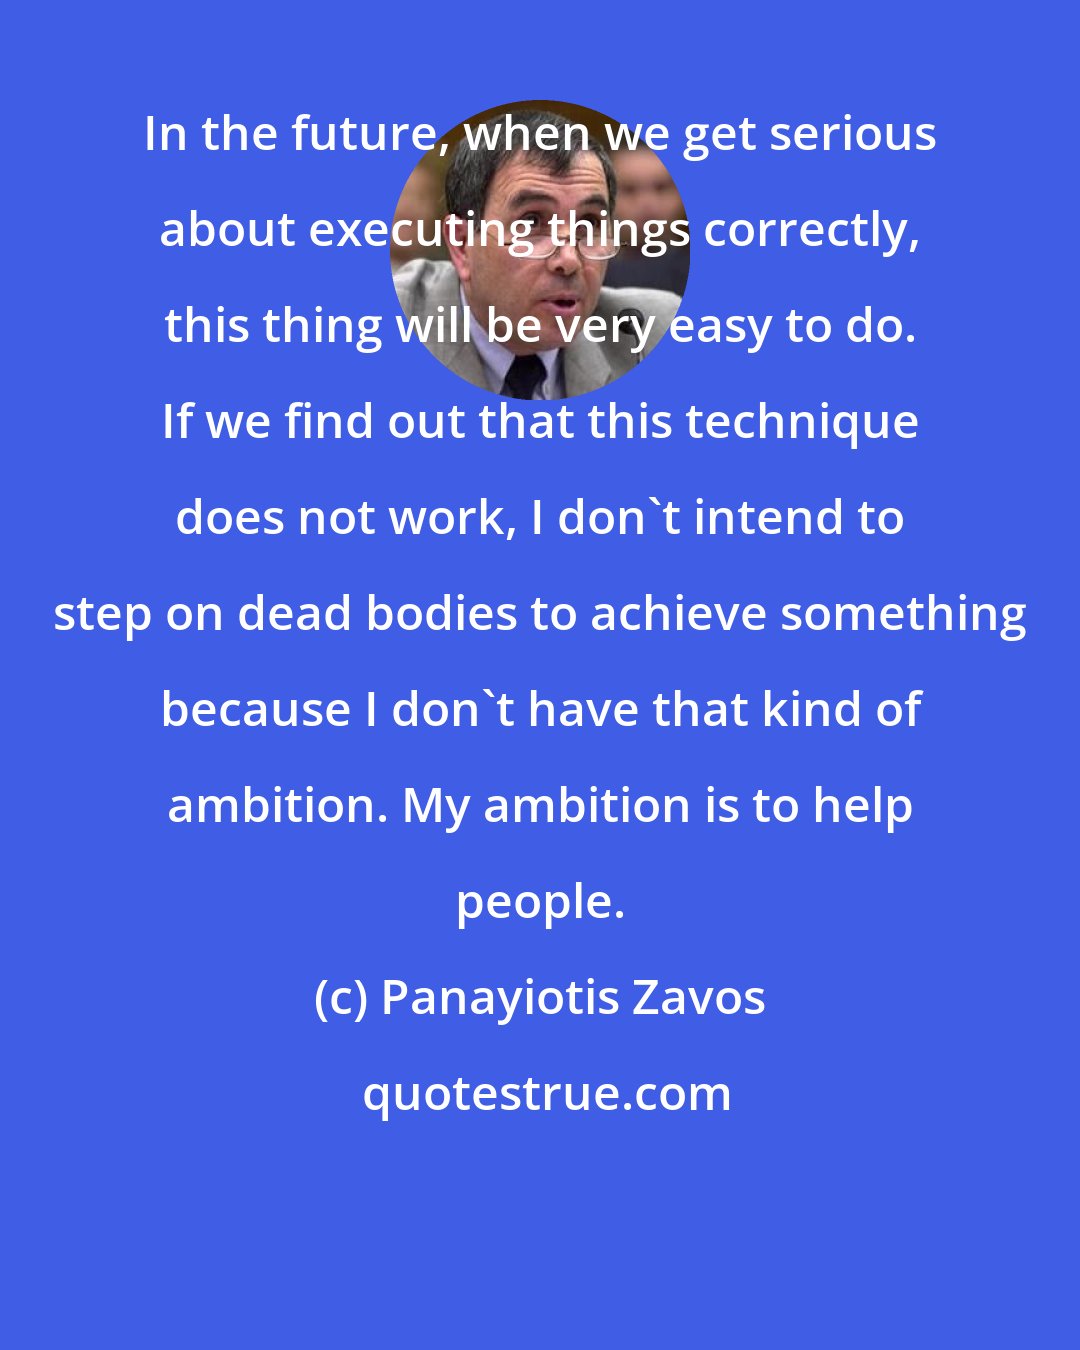 Panayiotis Zavos: In the future, when we get serious about executing things correctly, this thing will be very easy to do. If we find out that this technique does not work, I don't intend to step on dead bodies to achieve something because I don't have that kind of ambition. My ambition is to help people.